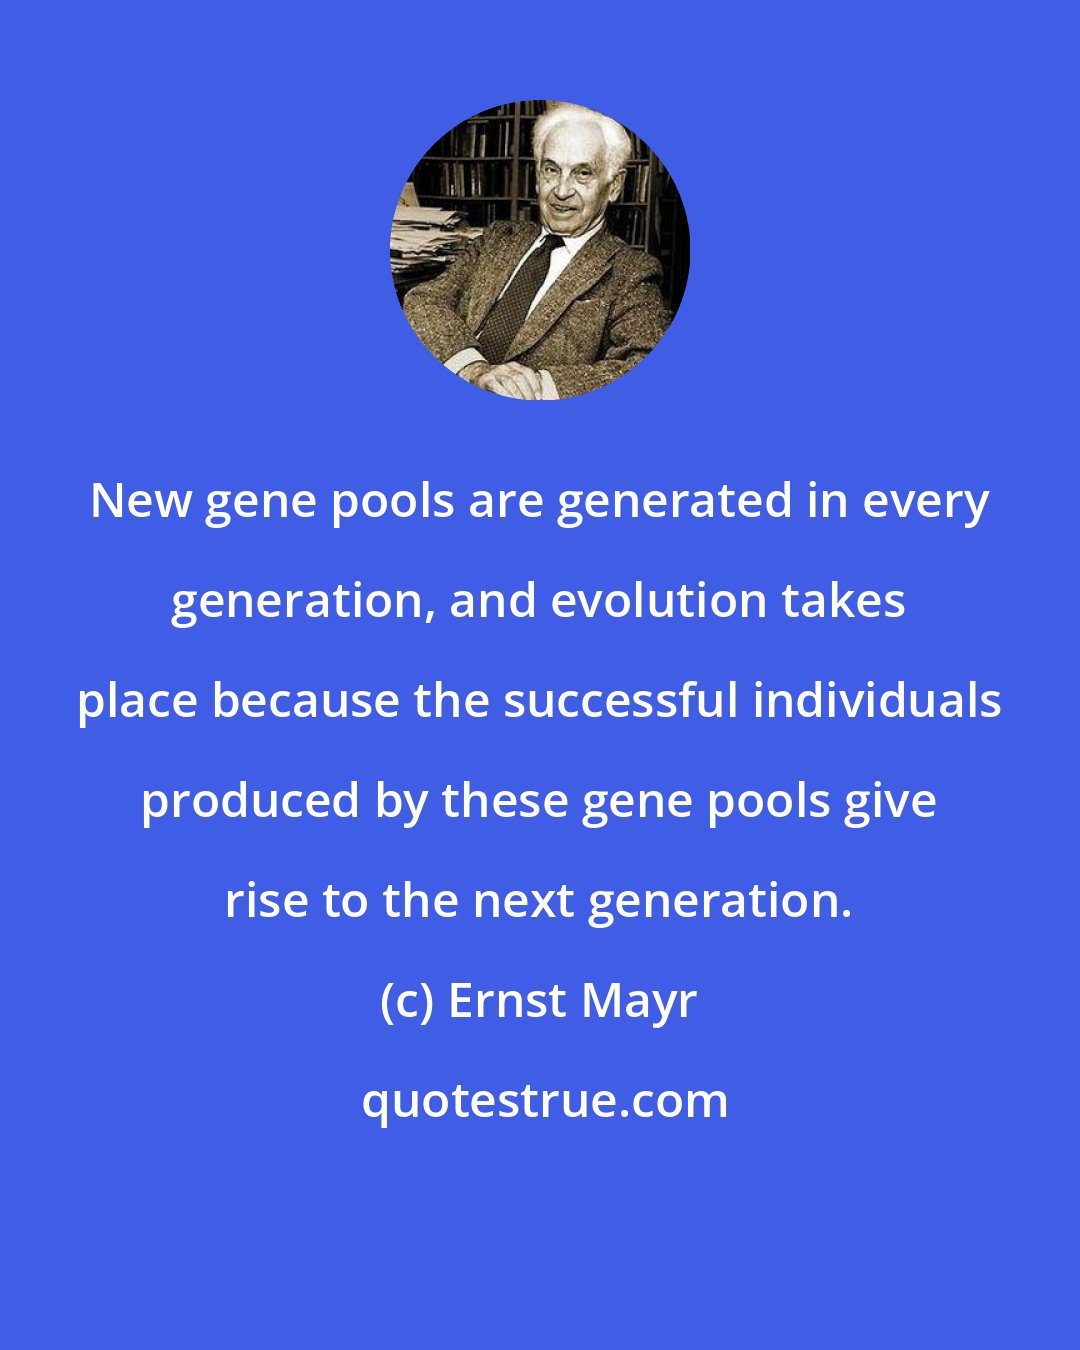 Ernst Mayr: New gene pools are generated in every generation, and evolution takes place because the successful individuals produced by these gene pools give rise to the next generation.